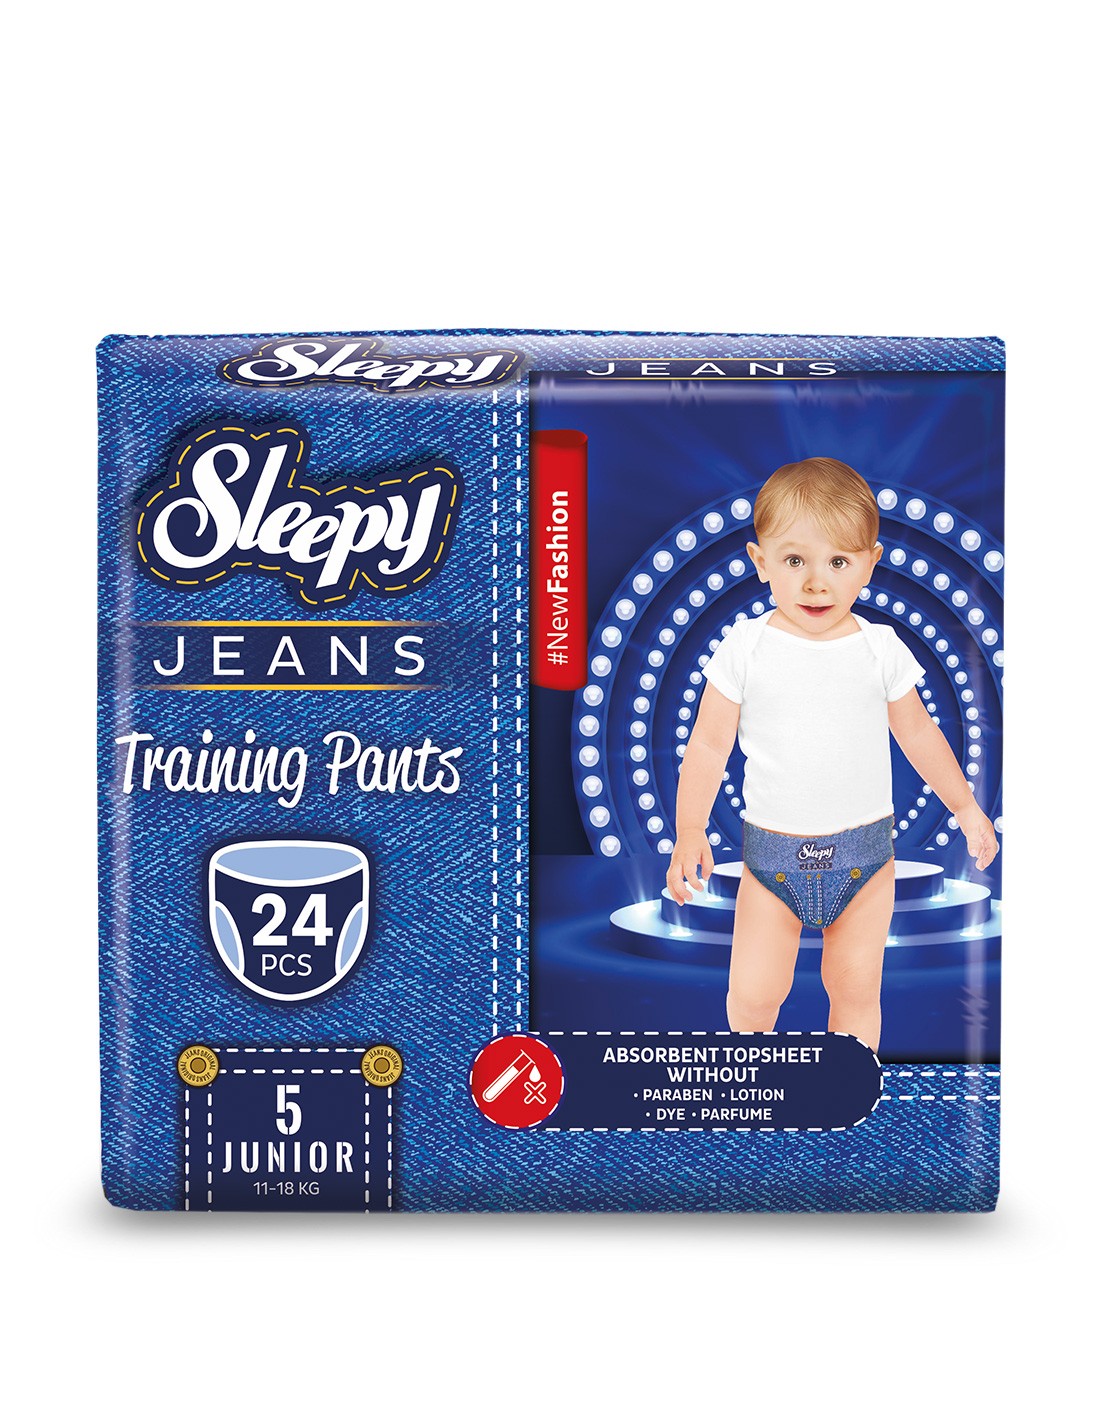 Diapers Sleepy Jeans PANTS Junior. Size 5, 11-18kg. In the package 24 pcs